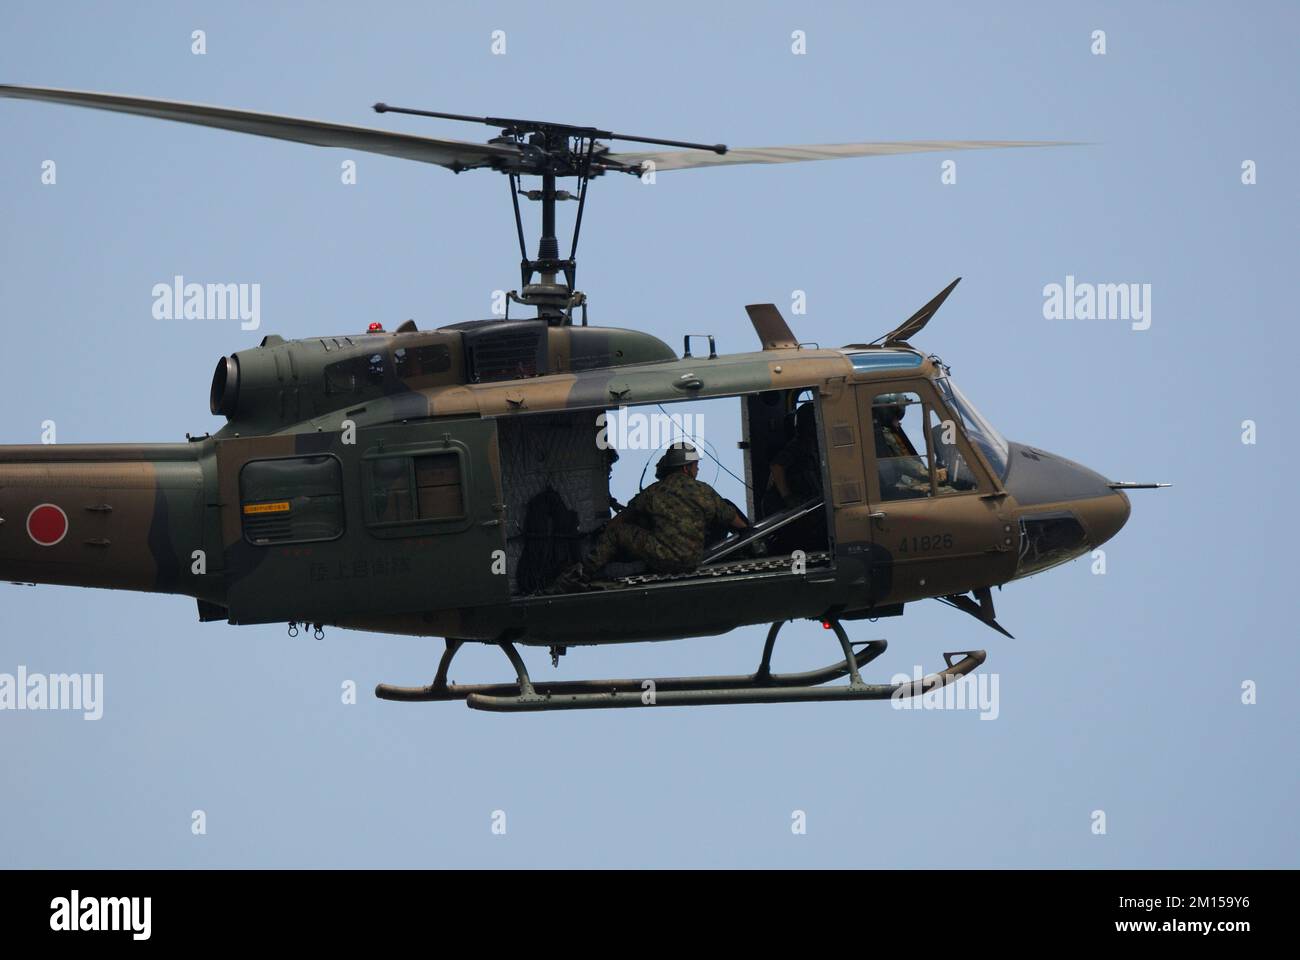 Shizuoka Prefecture, Japan - July 10, 2011: Japan Ground Self-Defense Force Bell UH-1J Iroquois utility helicopter. Stock Photo